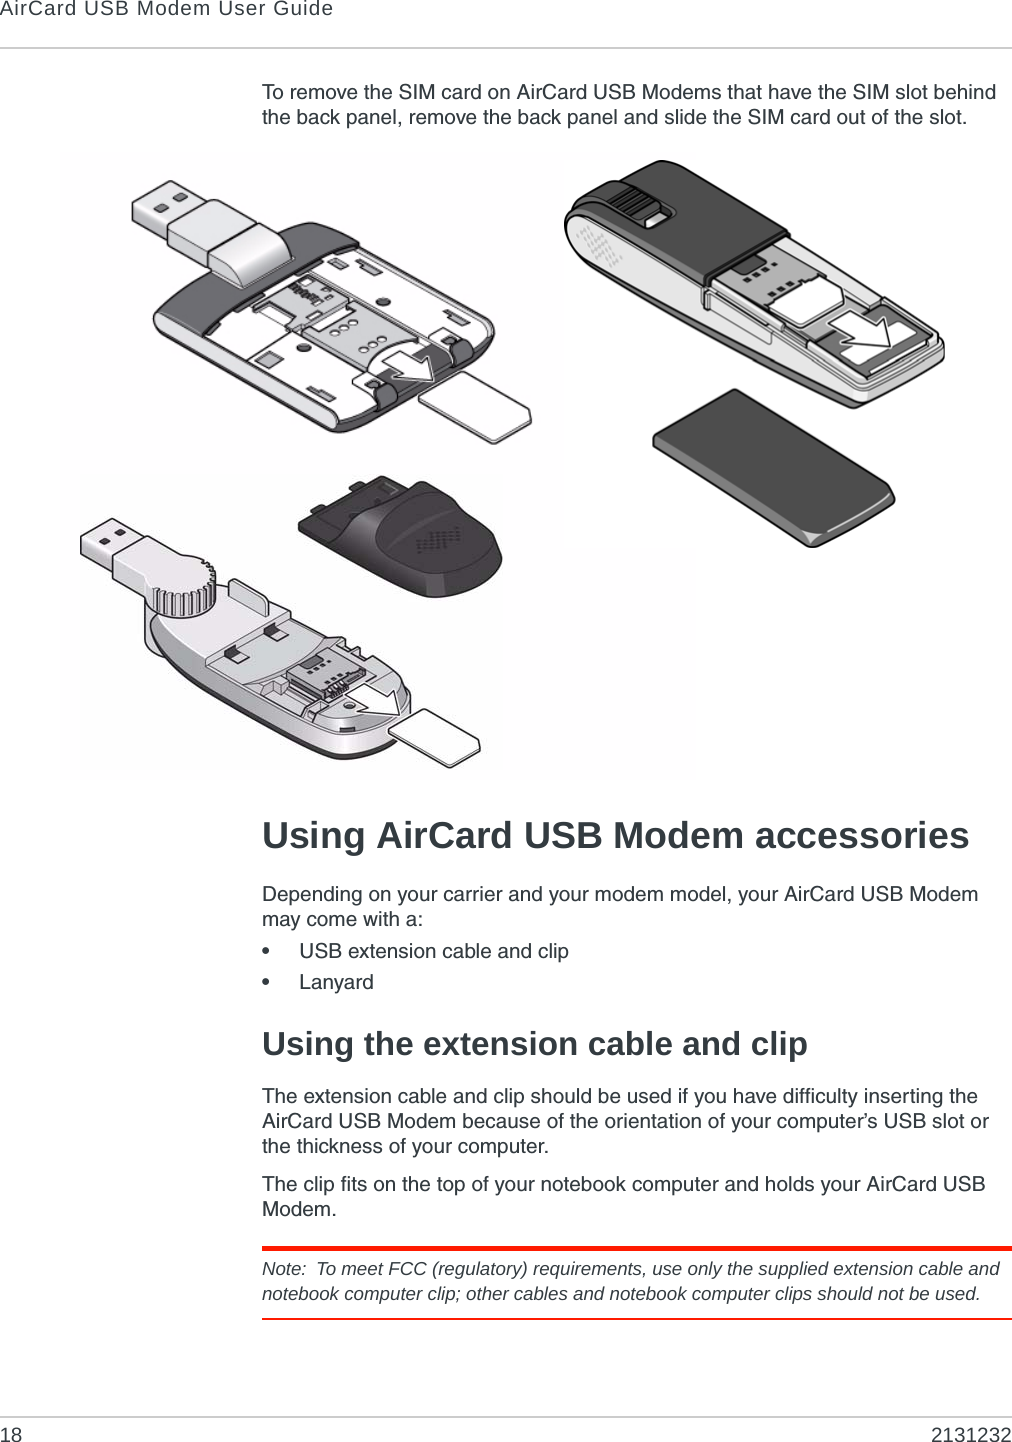 AirCard USB Modem User Guide18 2131232To remove the SIM card on AirCard USB Modems that have the SIM slot behind the back panel, remove the back panel and slide the SIM card out of the slot.Using AirCard USB Modem accessoriesDepending on your carrier and your modem model, your AirCard USB Modem may come with a:•USB extension cable and clip•LanyardUsing the extension cable and clipThe extension cable and clip should be used if you have difficulty inserting the AirCard USB Modem because of the orientation of your computer’s USB slot or the thickness of your computer.The clip fits on the top of your notebook computer and holds your AirCard USB Modem.Note: To meet FCC (regulatory) requirements, use only the supplied extension cable and notebook computer clip; other cables and notebook computer clips should not be used. 